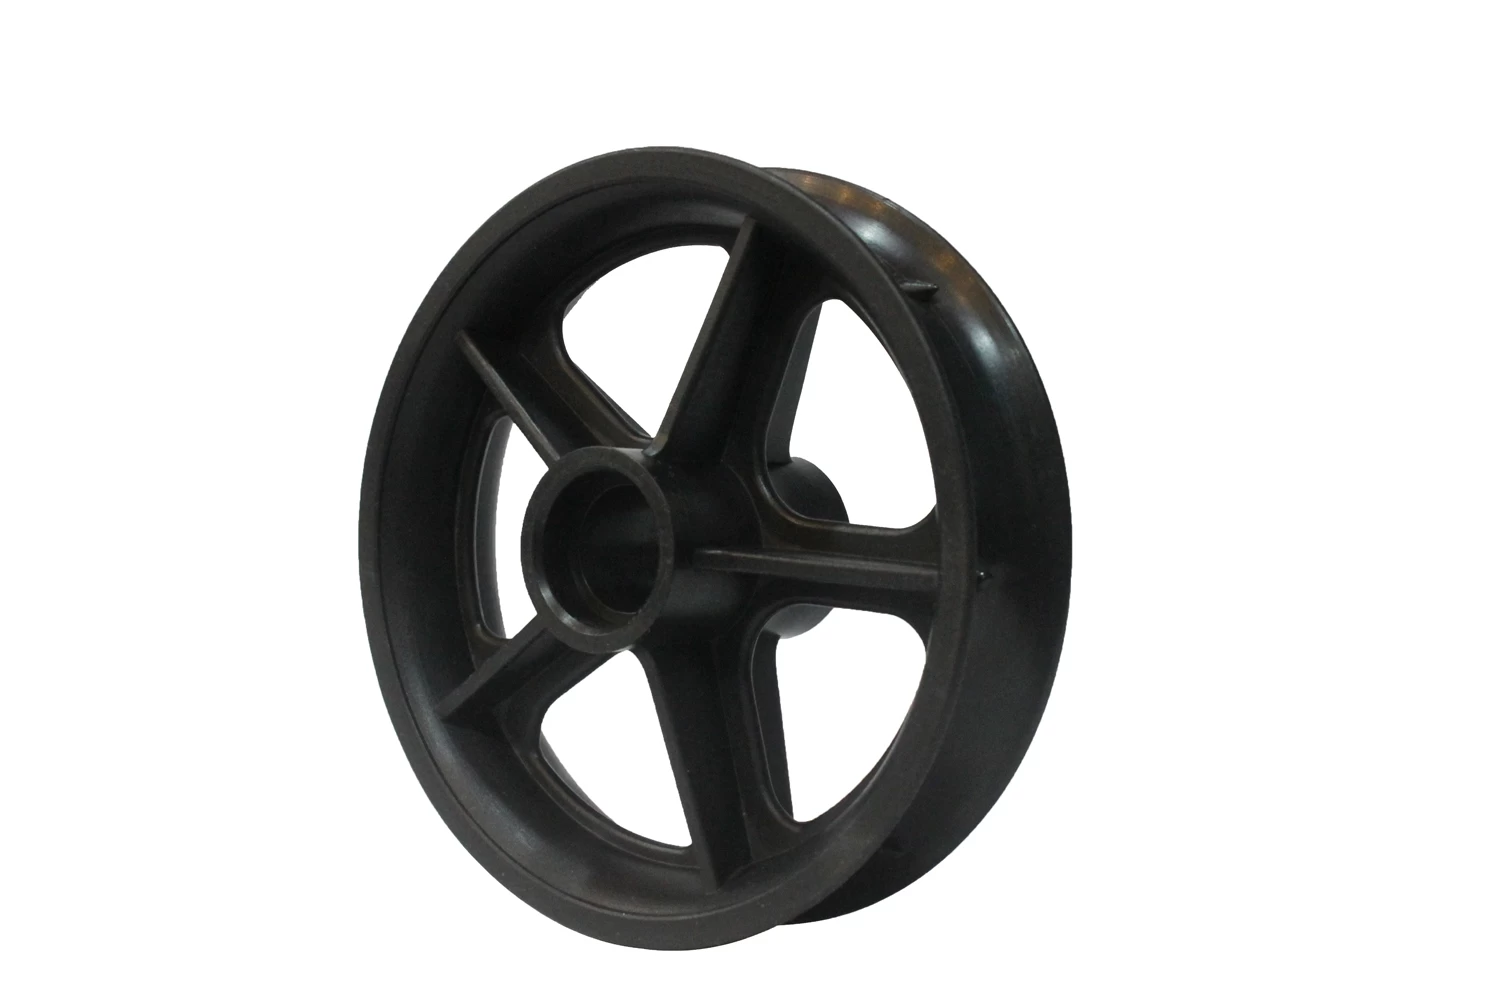 Cina whole flat free solid wheel,Solid Tires,pu foam tire,polyurethane tire fill produttore